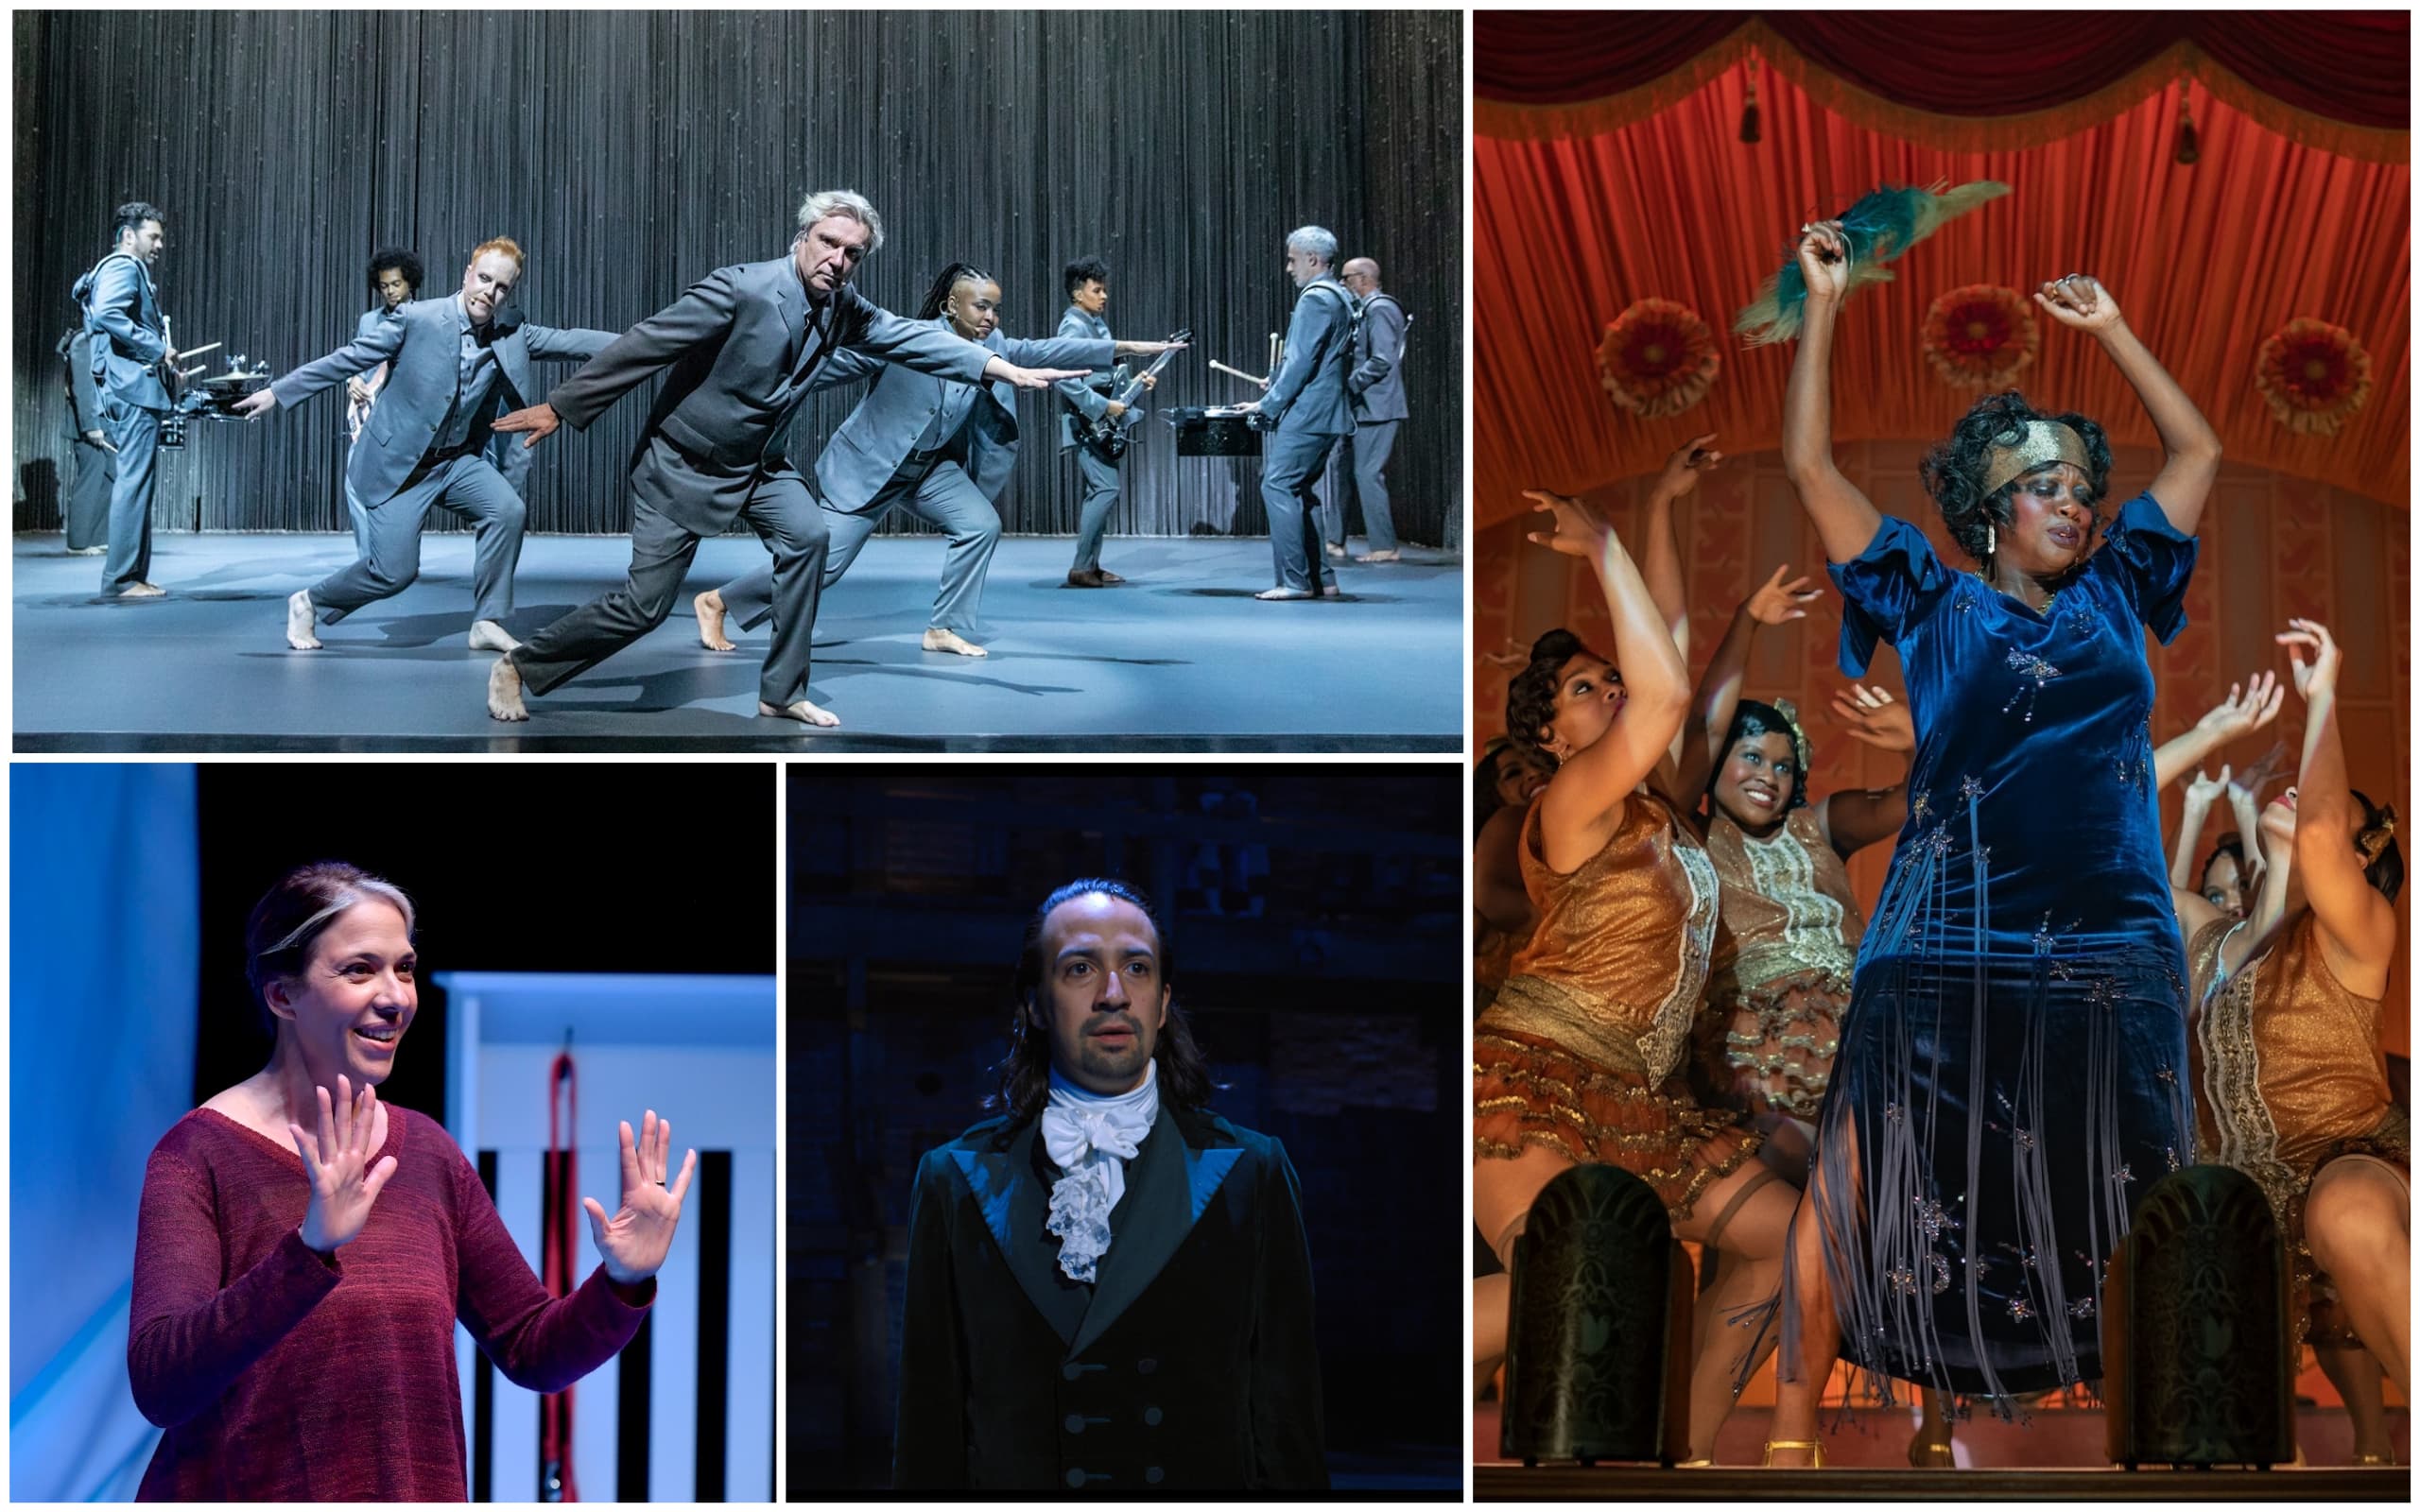 Theater critics Jacquinn Sinclair and Ed Siegel selected their favorite theater productions from the year, including David Byrne's &quot;American Utopia,&quot; &quot;Ma Rainey's Black Bottom&quot; on Netflix, &quot;Mala&quot; from the Huntington Theatre Company and &quot;Hamilton,&quot; which is available to stream on Disney+. (Courtesy)